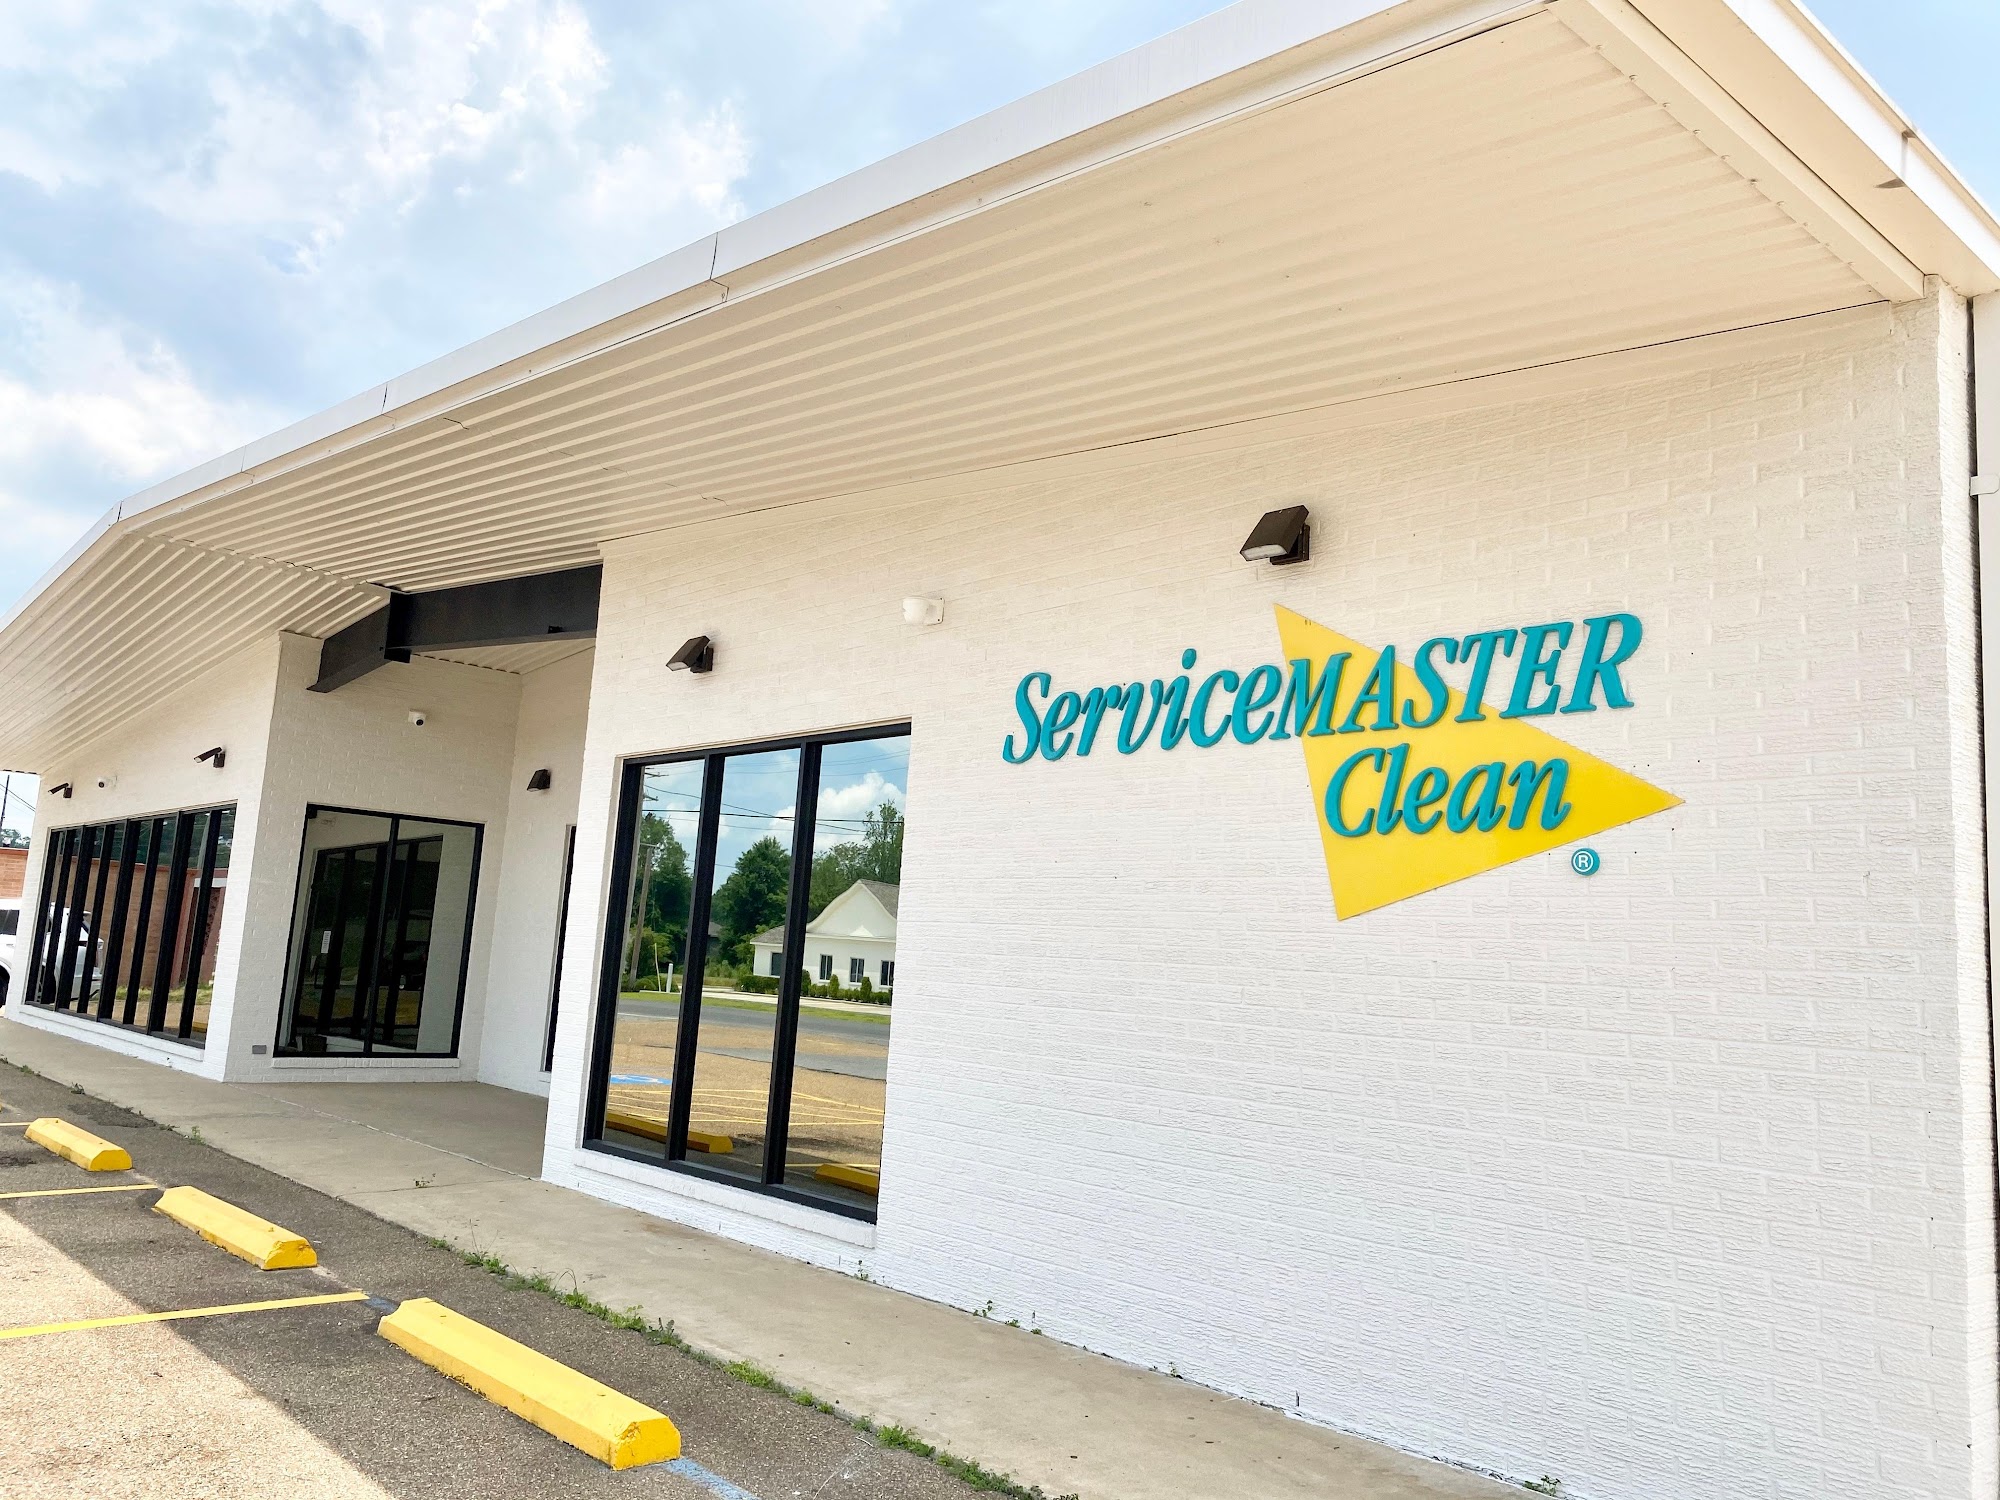 ServiceMaster Action Cleaning